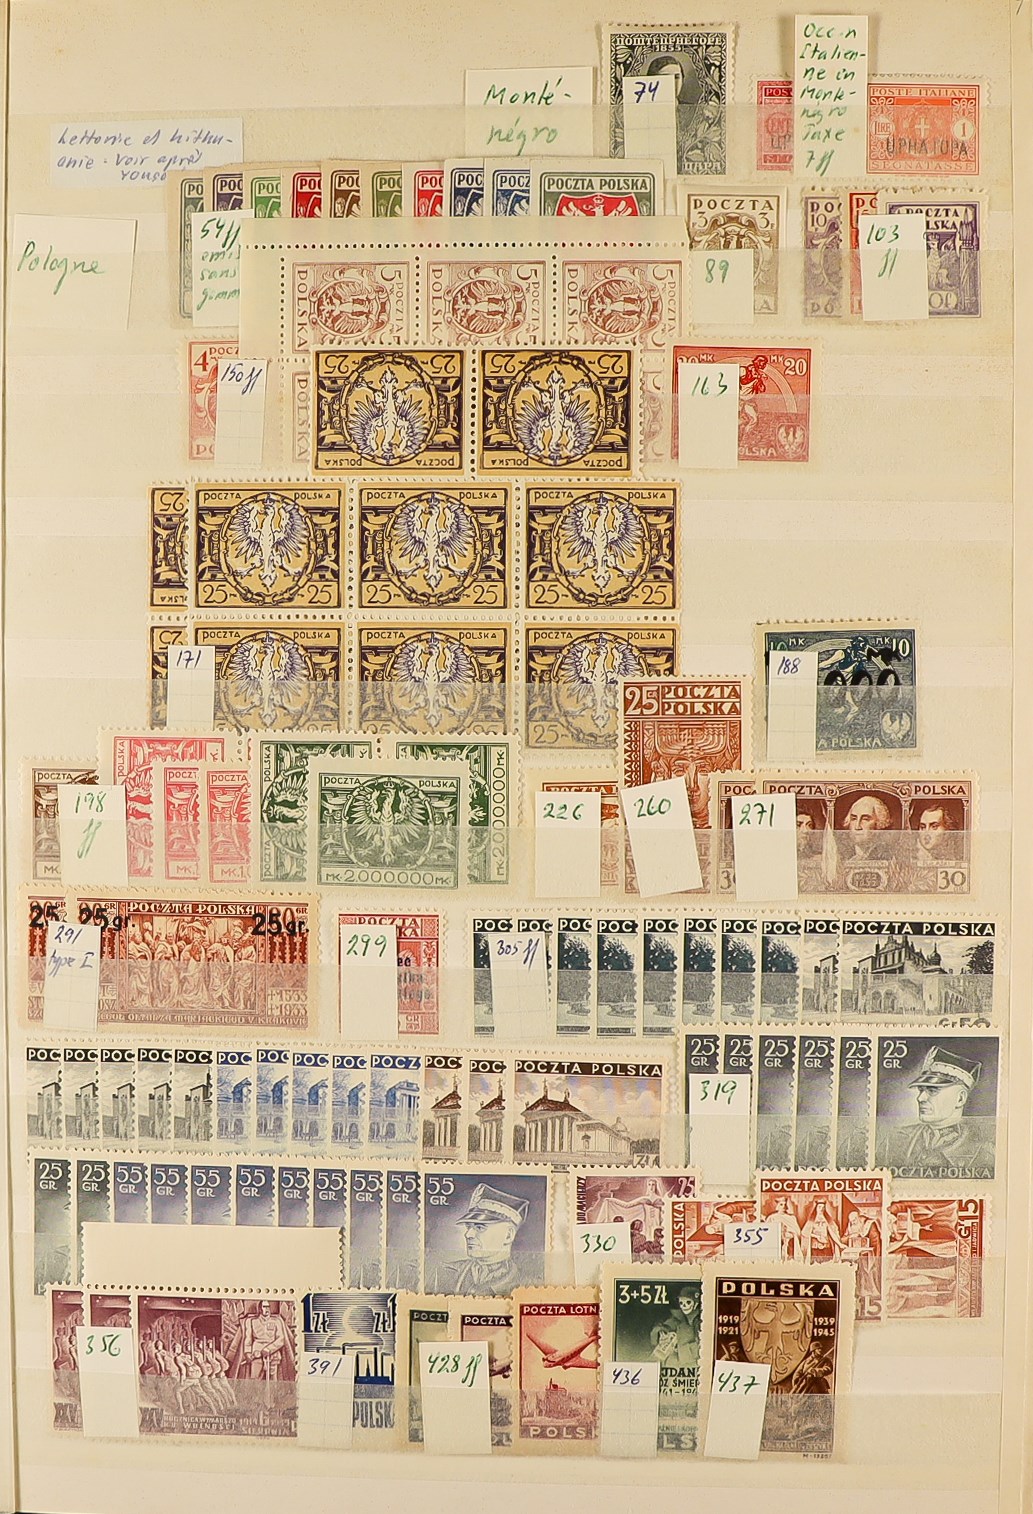 COLLECTIONS & ACCUMULATIONS WORLD WIDE MINT / NEVER HINGED MINT STAMPS in stock books, packets, - Image 4 of 17